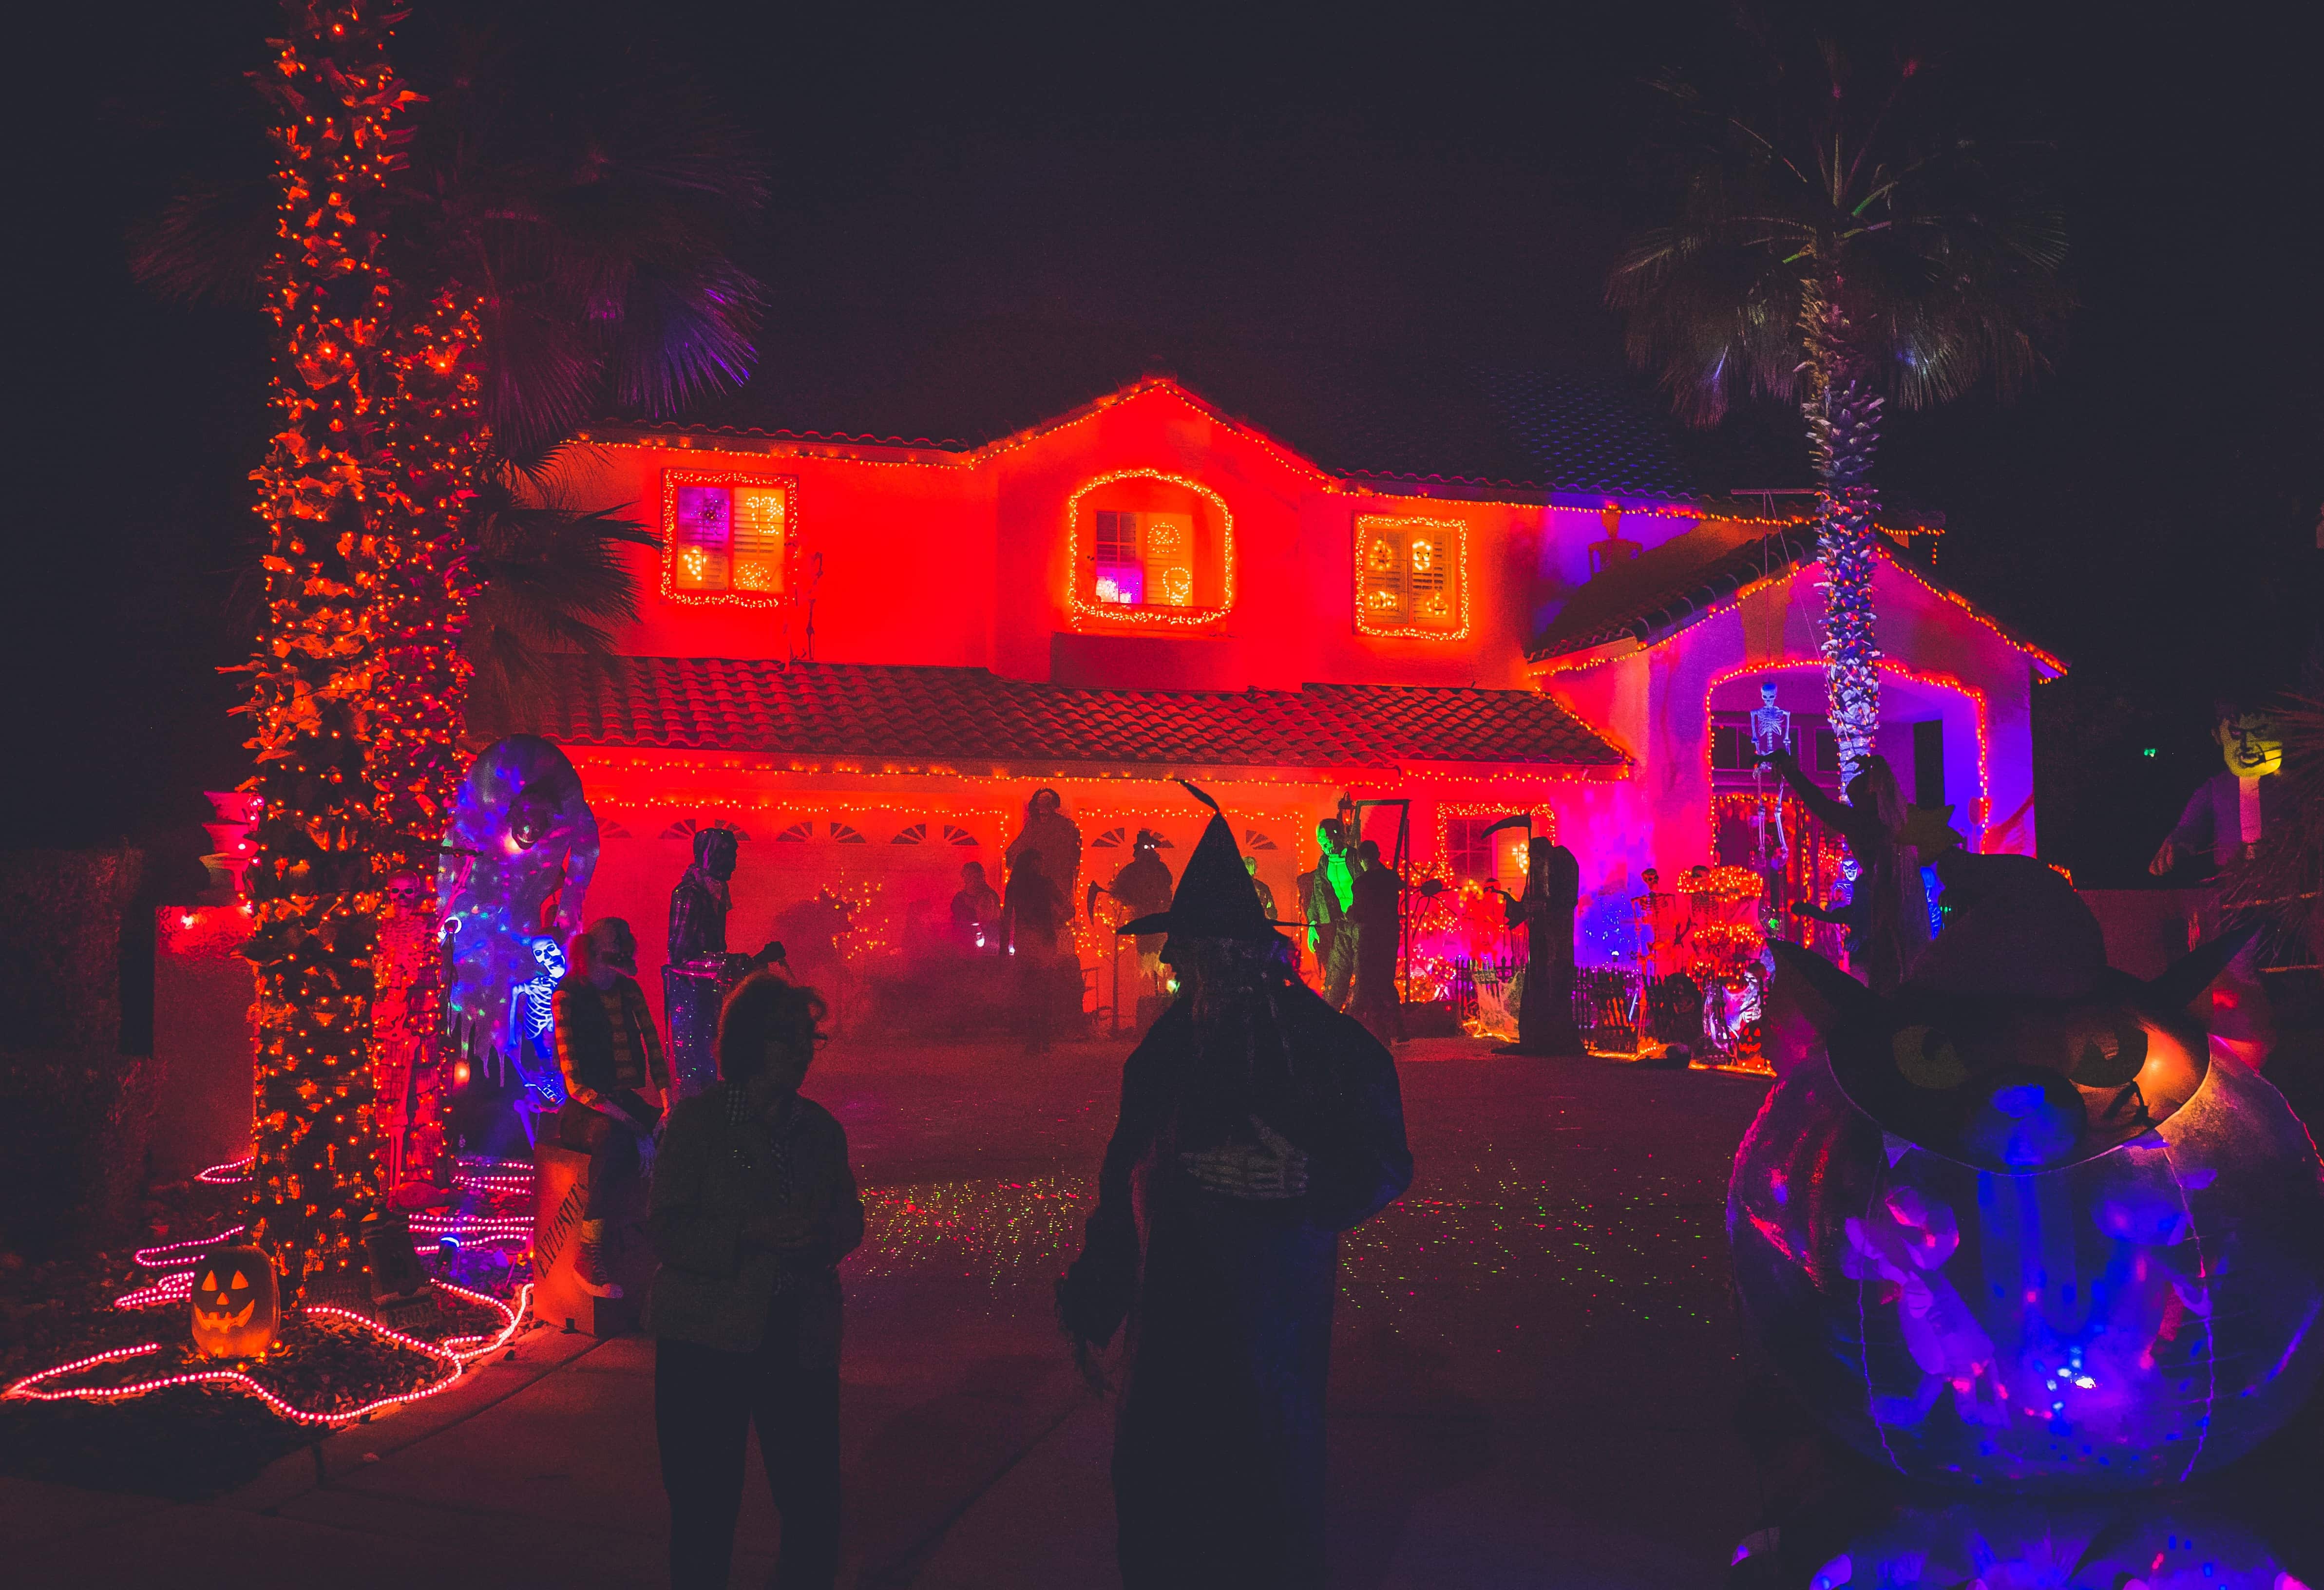 Trick-or-treaters in front of a decorated house on Halloween